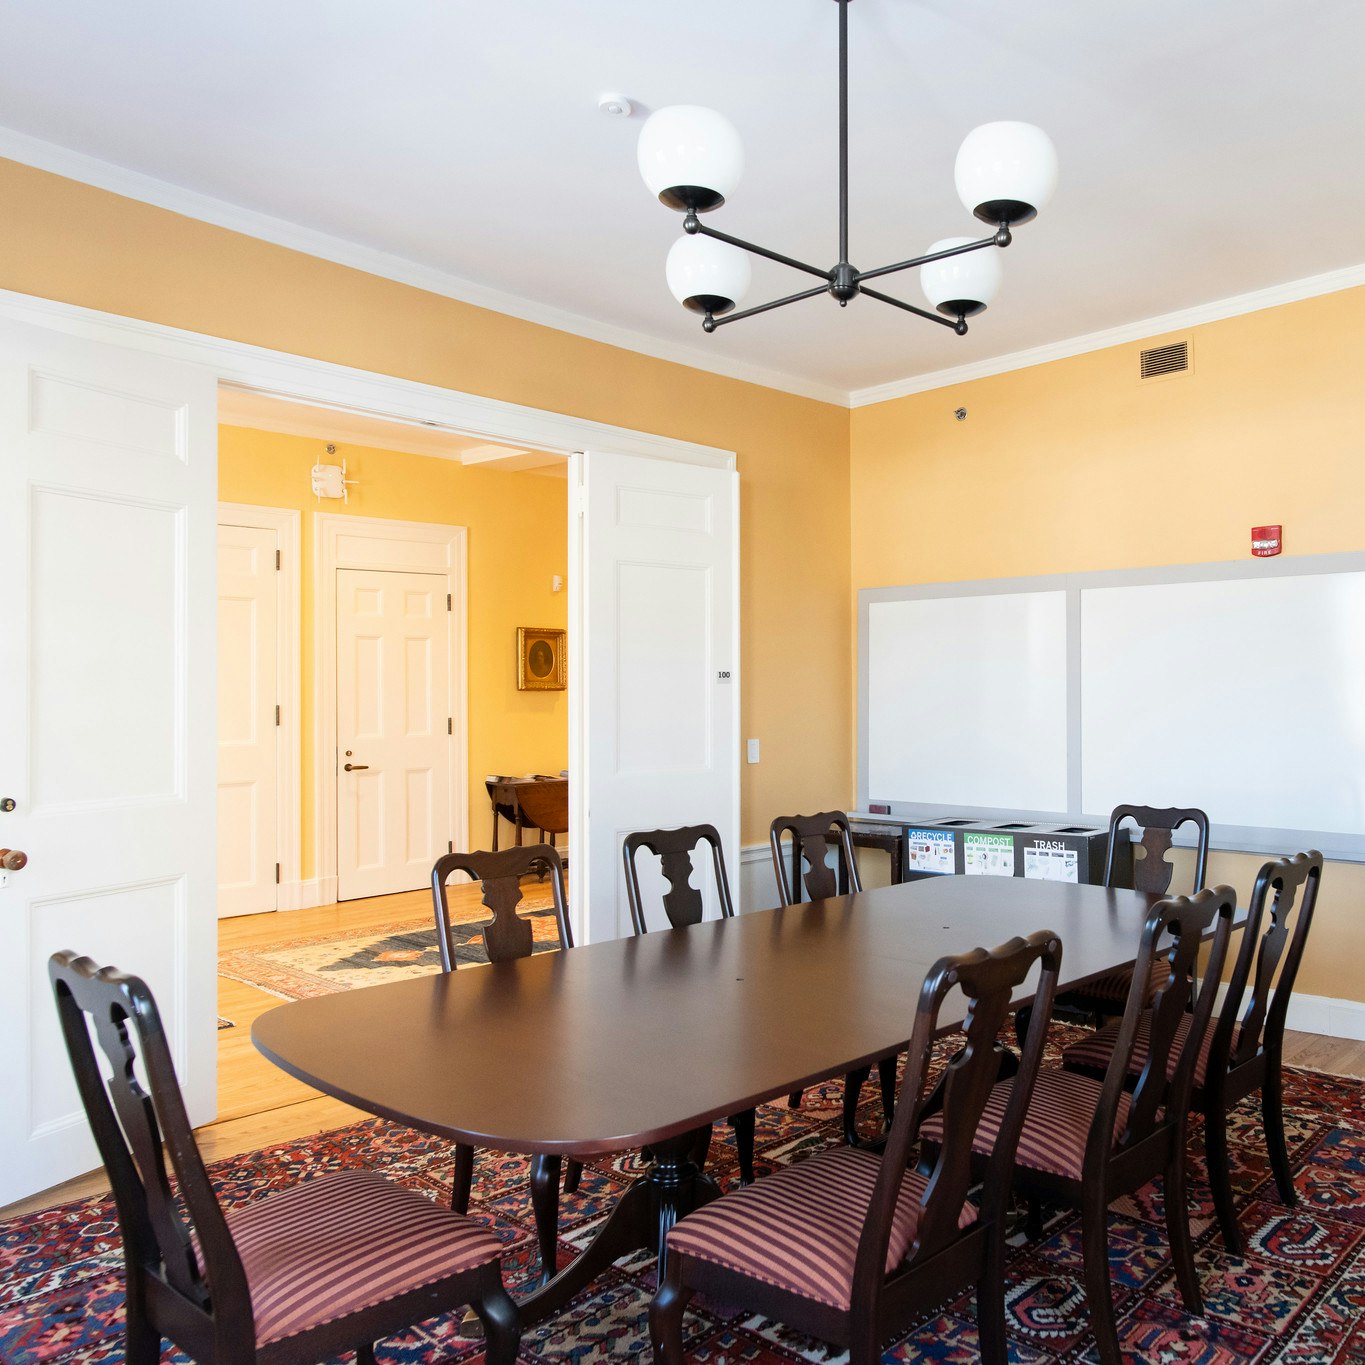 Another angle of dark brown wood conference table with 8 seats lined around. Entrance is in view, with two white doors open, and 3 white boards mounted to the wall behind the table. Walls are yellow.